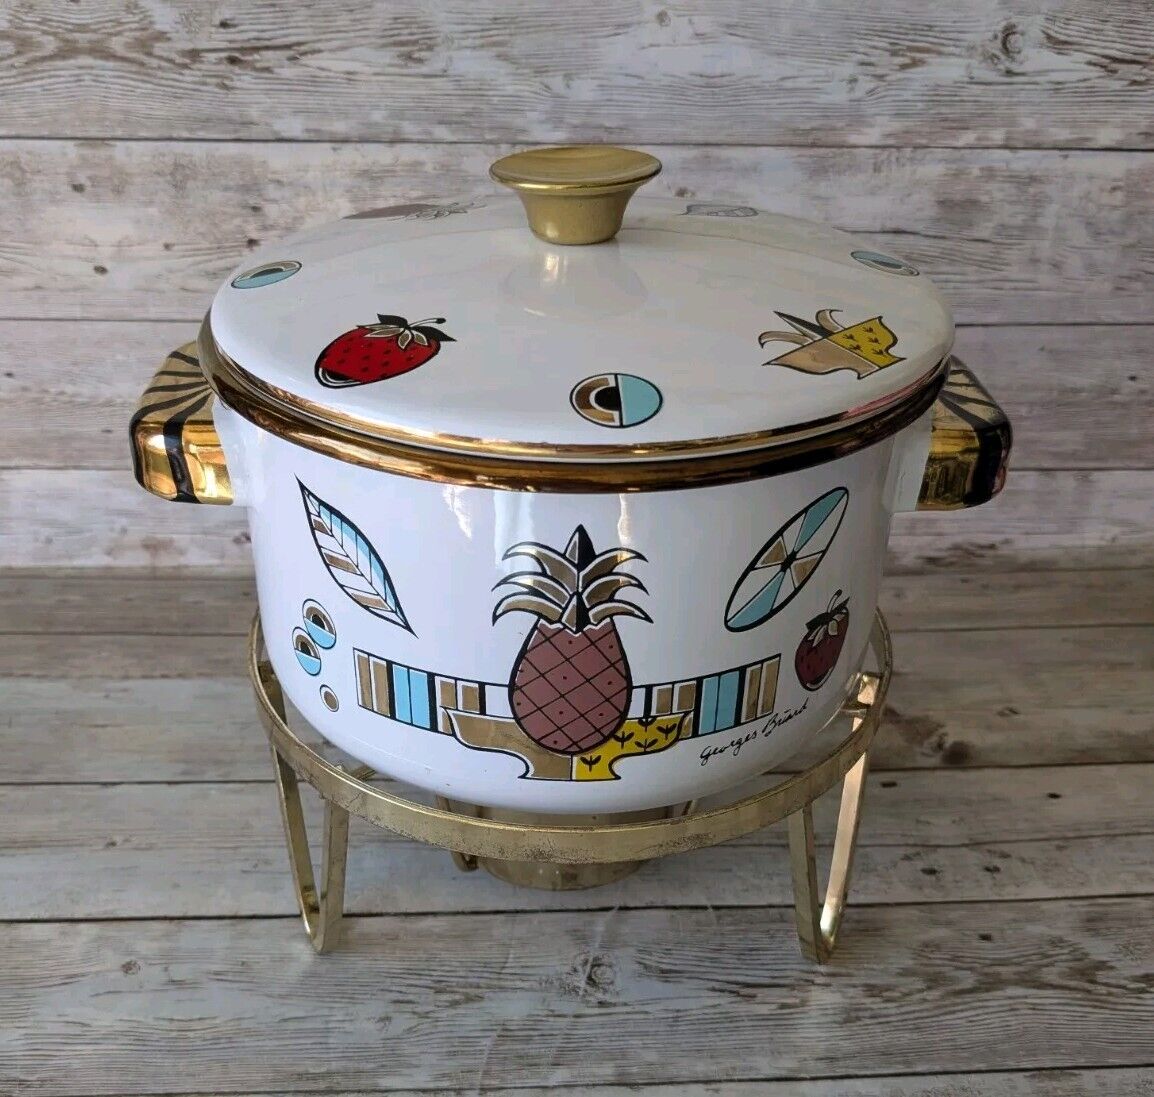 Vintage Georges Briard Ambrosia Enamel Pot w/ Lid and Chafing Stand 2 Quart MCM 